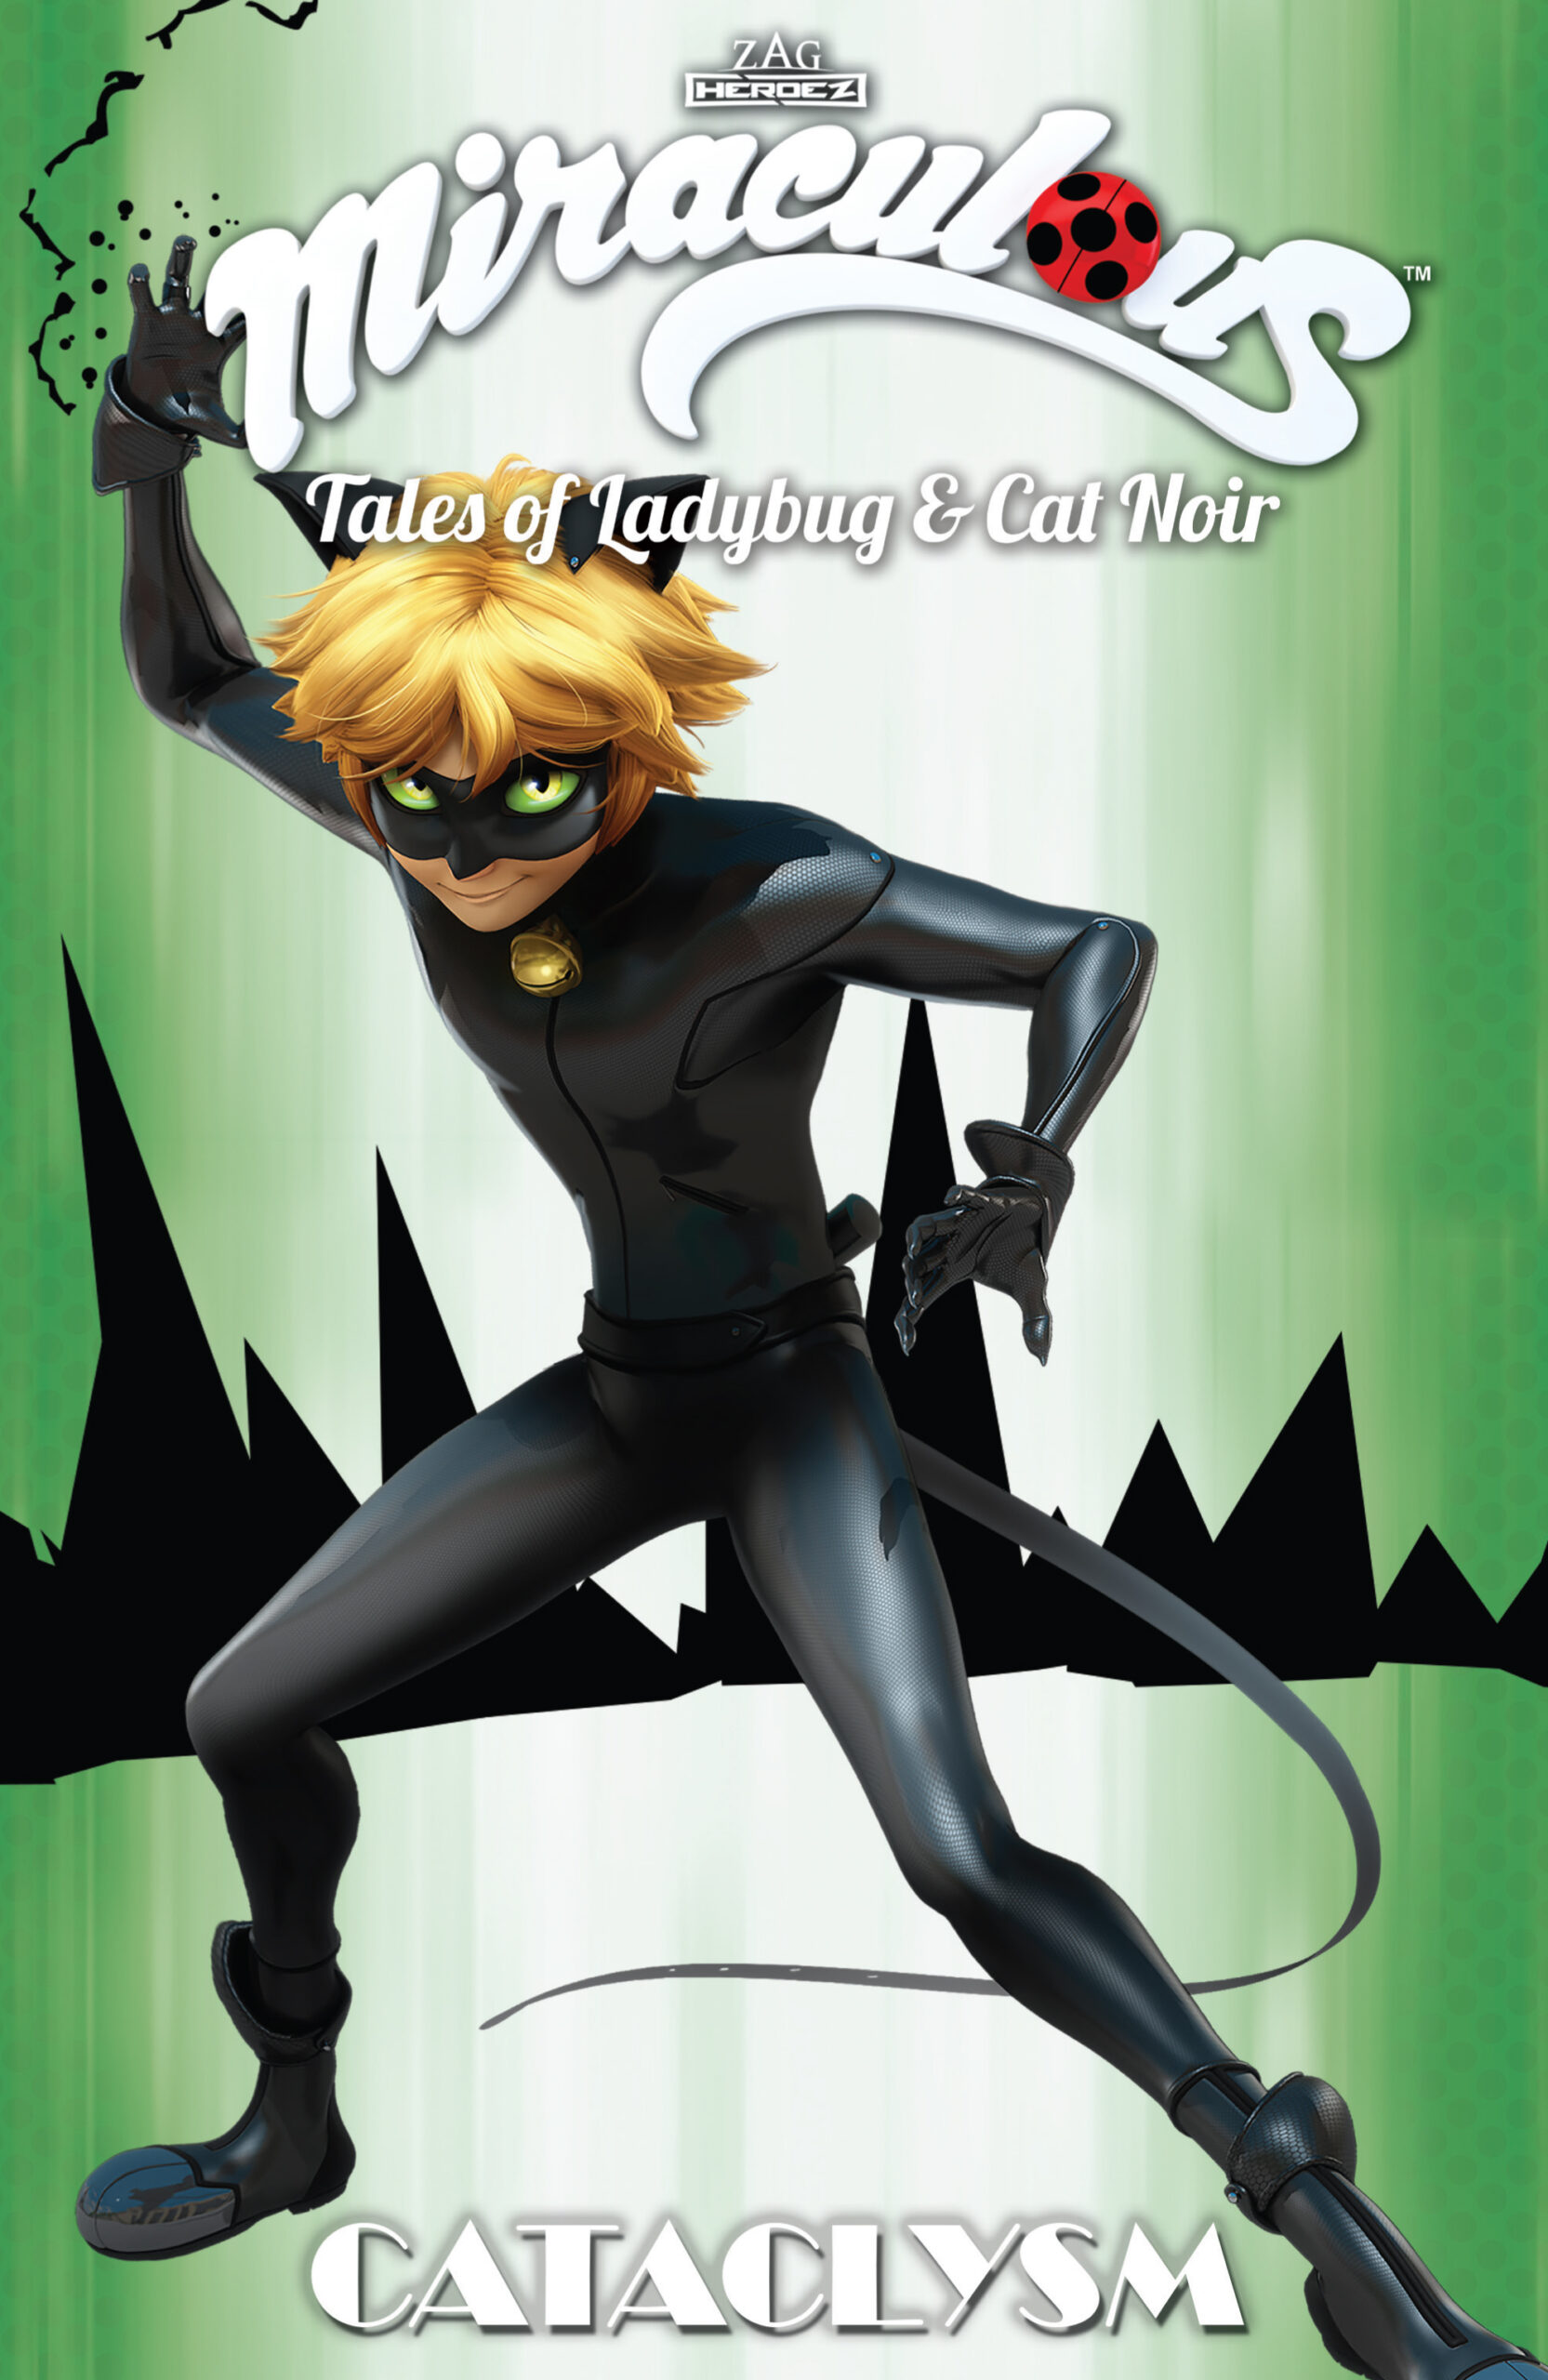 MIRACULOUS TALES OF LADYBUG AND CAT NOIR VOLUME 6 CATACLYSM First